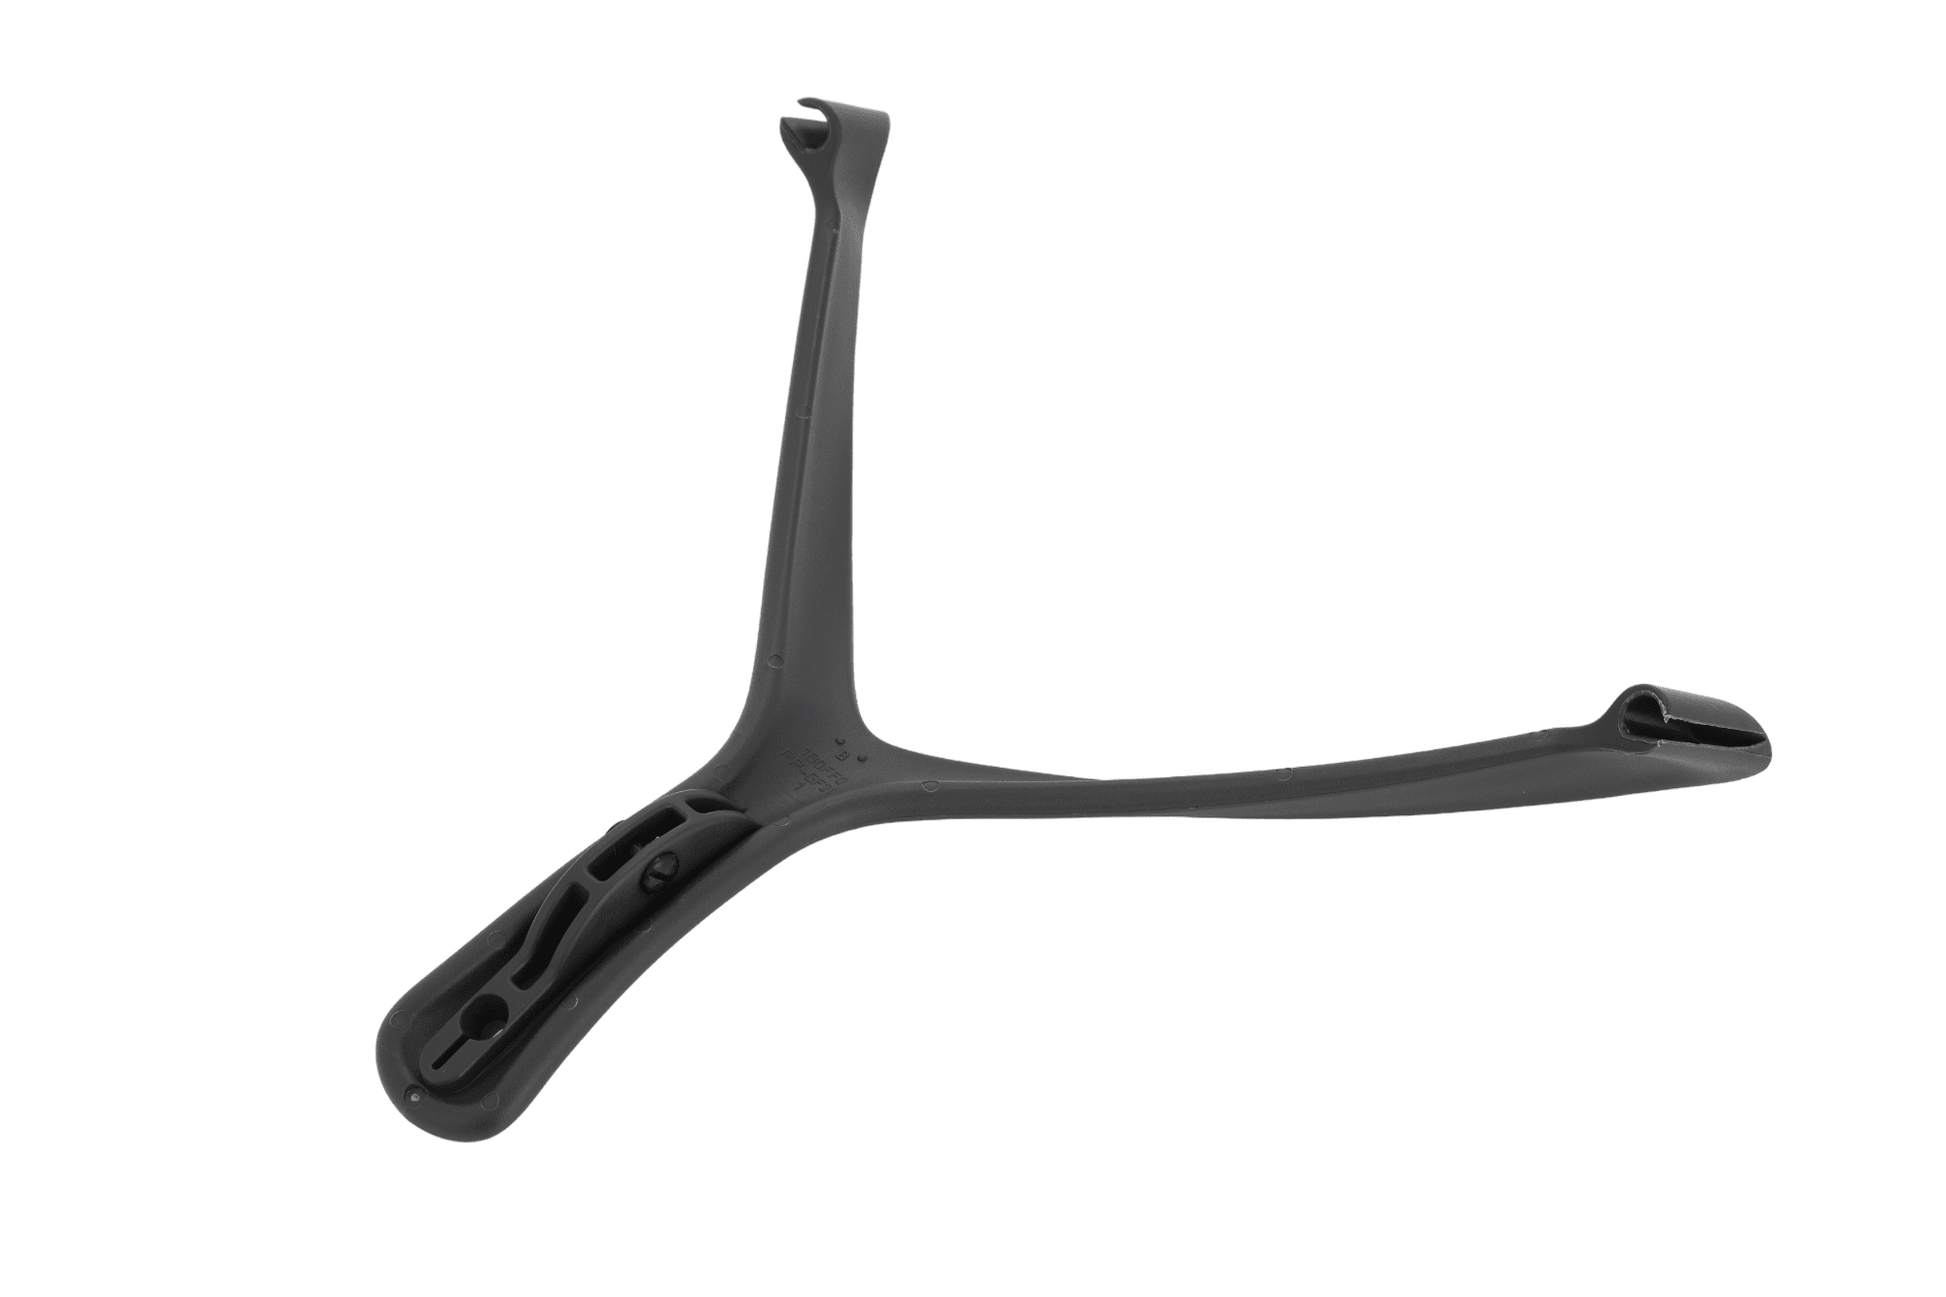 Replacement For Herman Miller Aeron Chair Y Wish Bone for Posture Fit |Graphite| Size B - chairorama